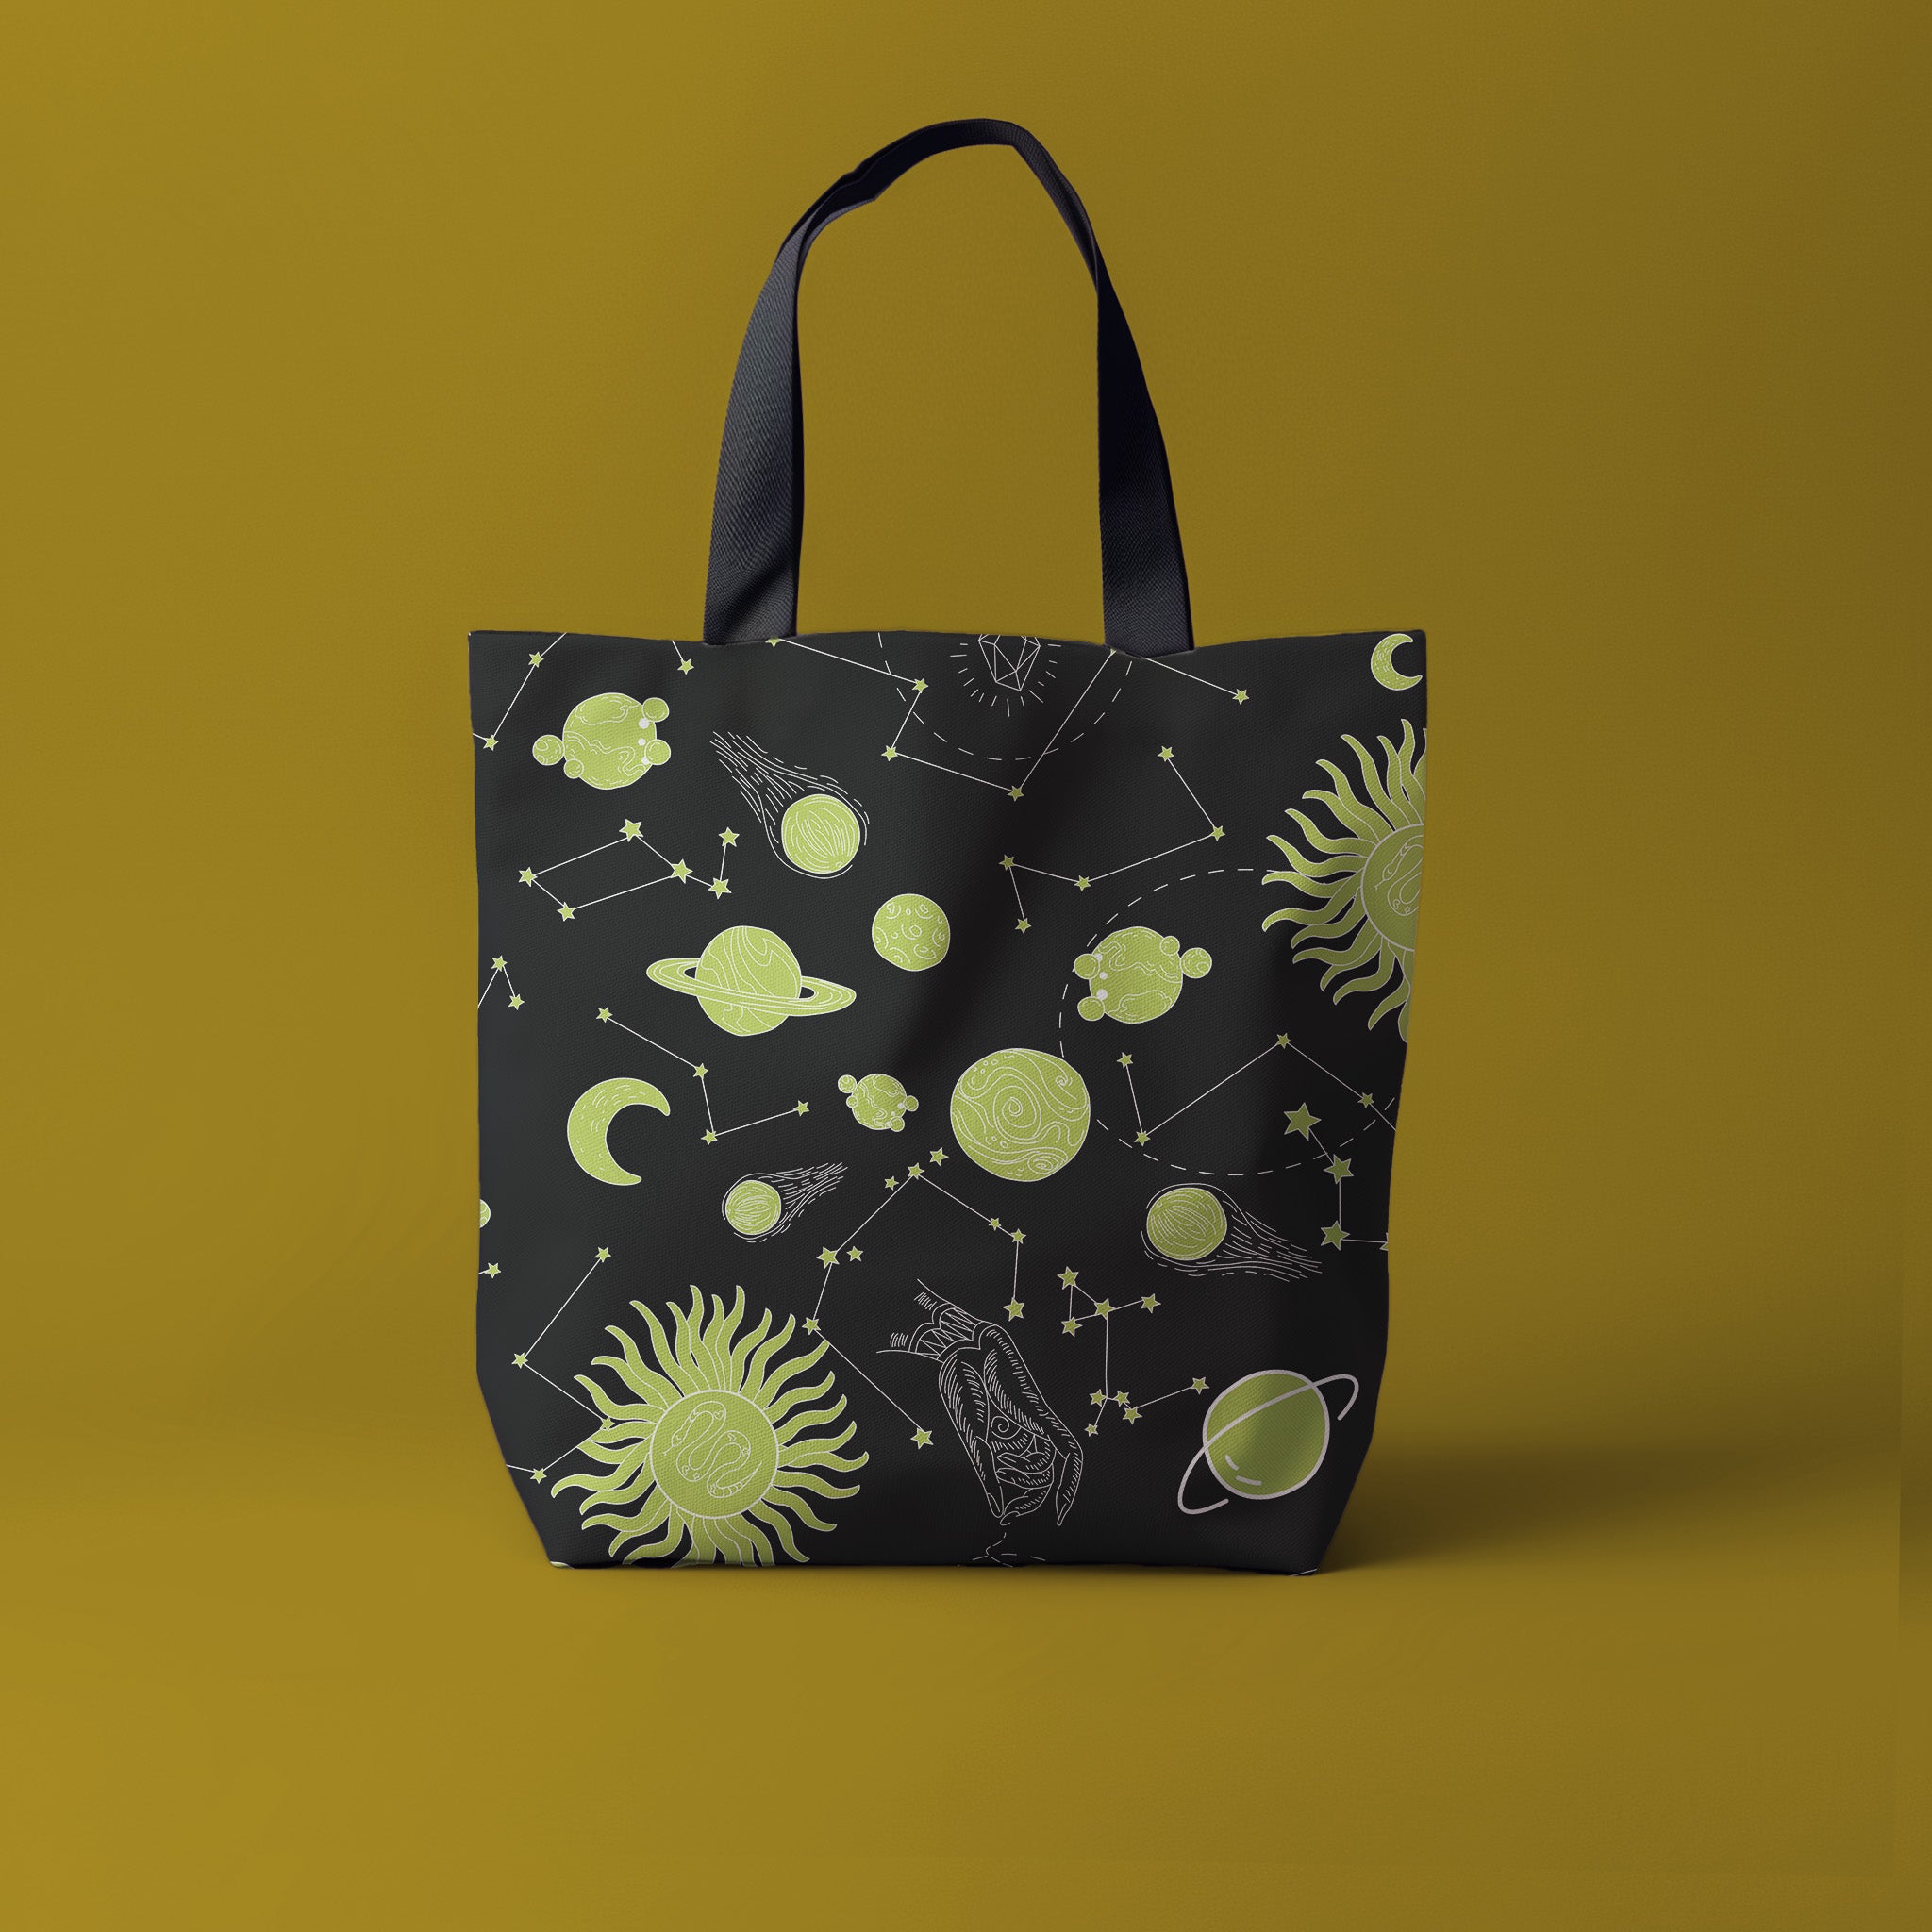 Celestial Cartography Carryall Tote in Galaxy Green